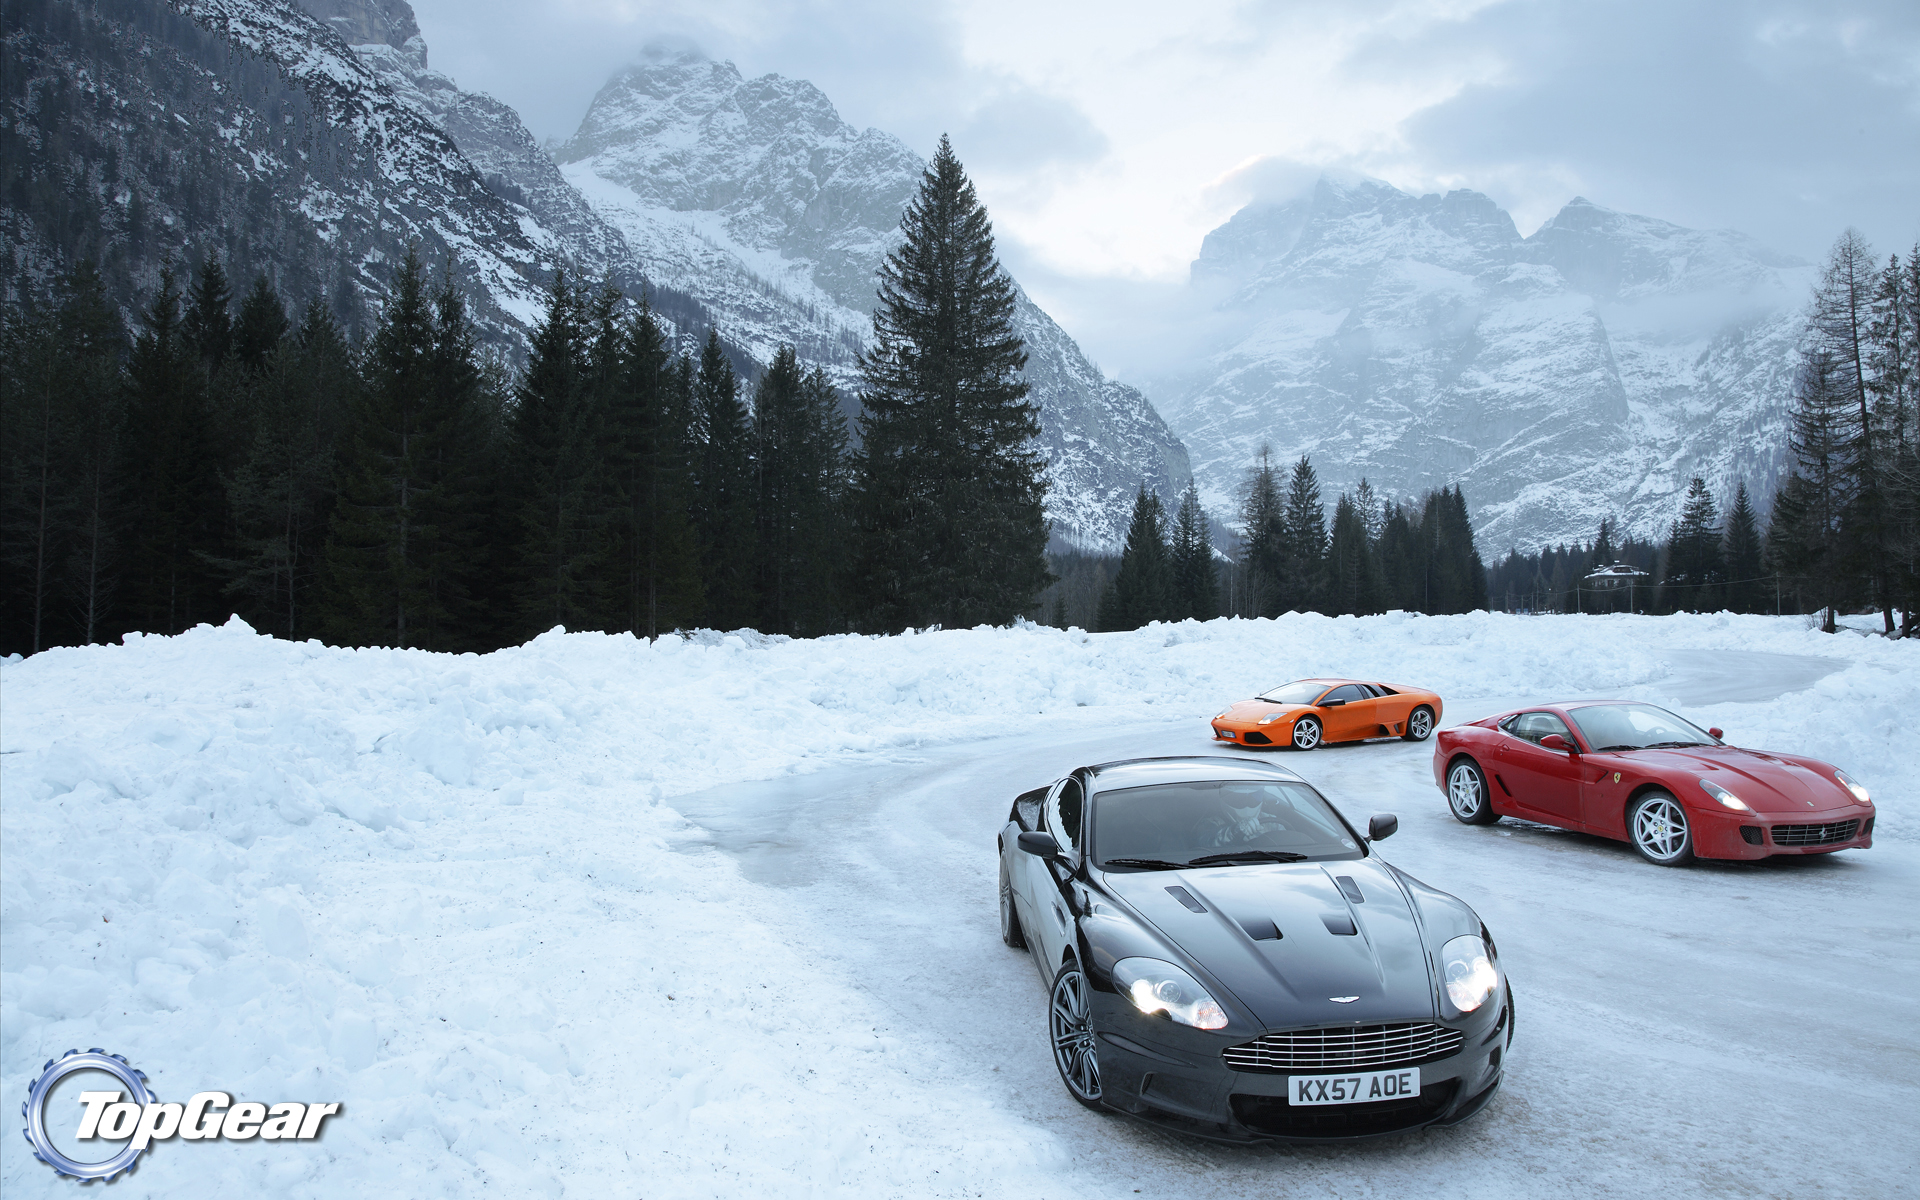 Top Gear Wallpaper The Snowy Edition